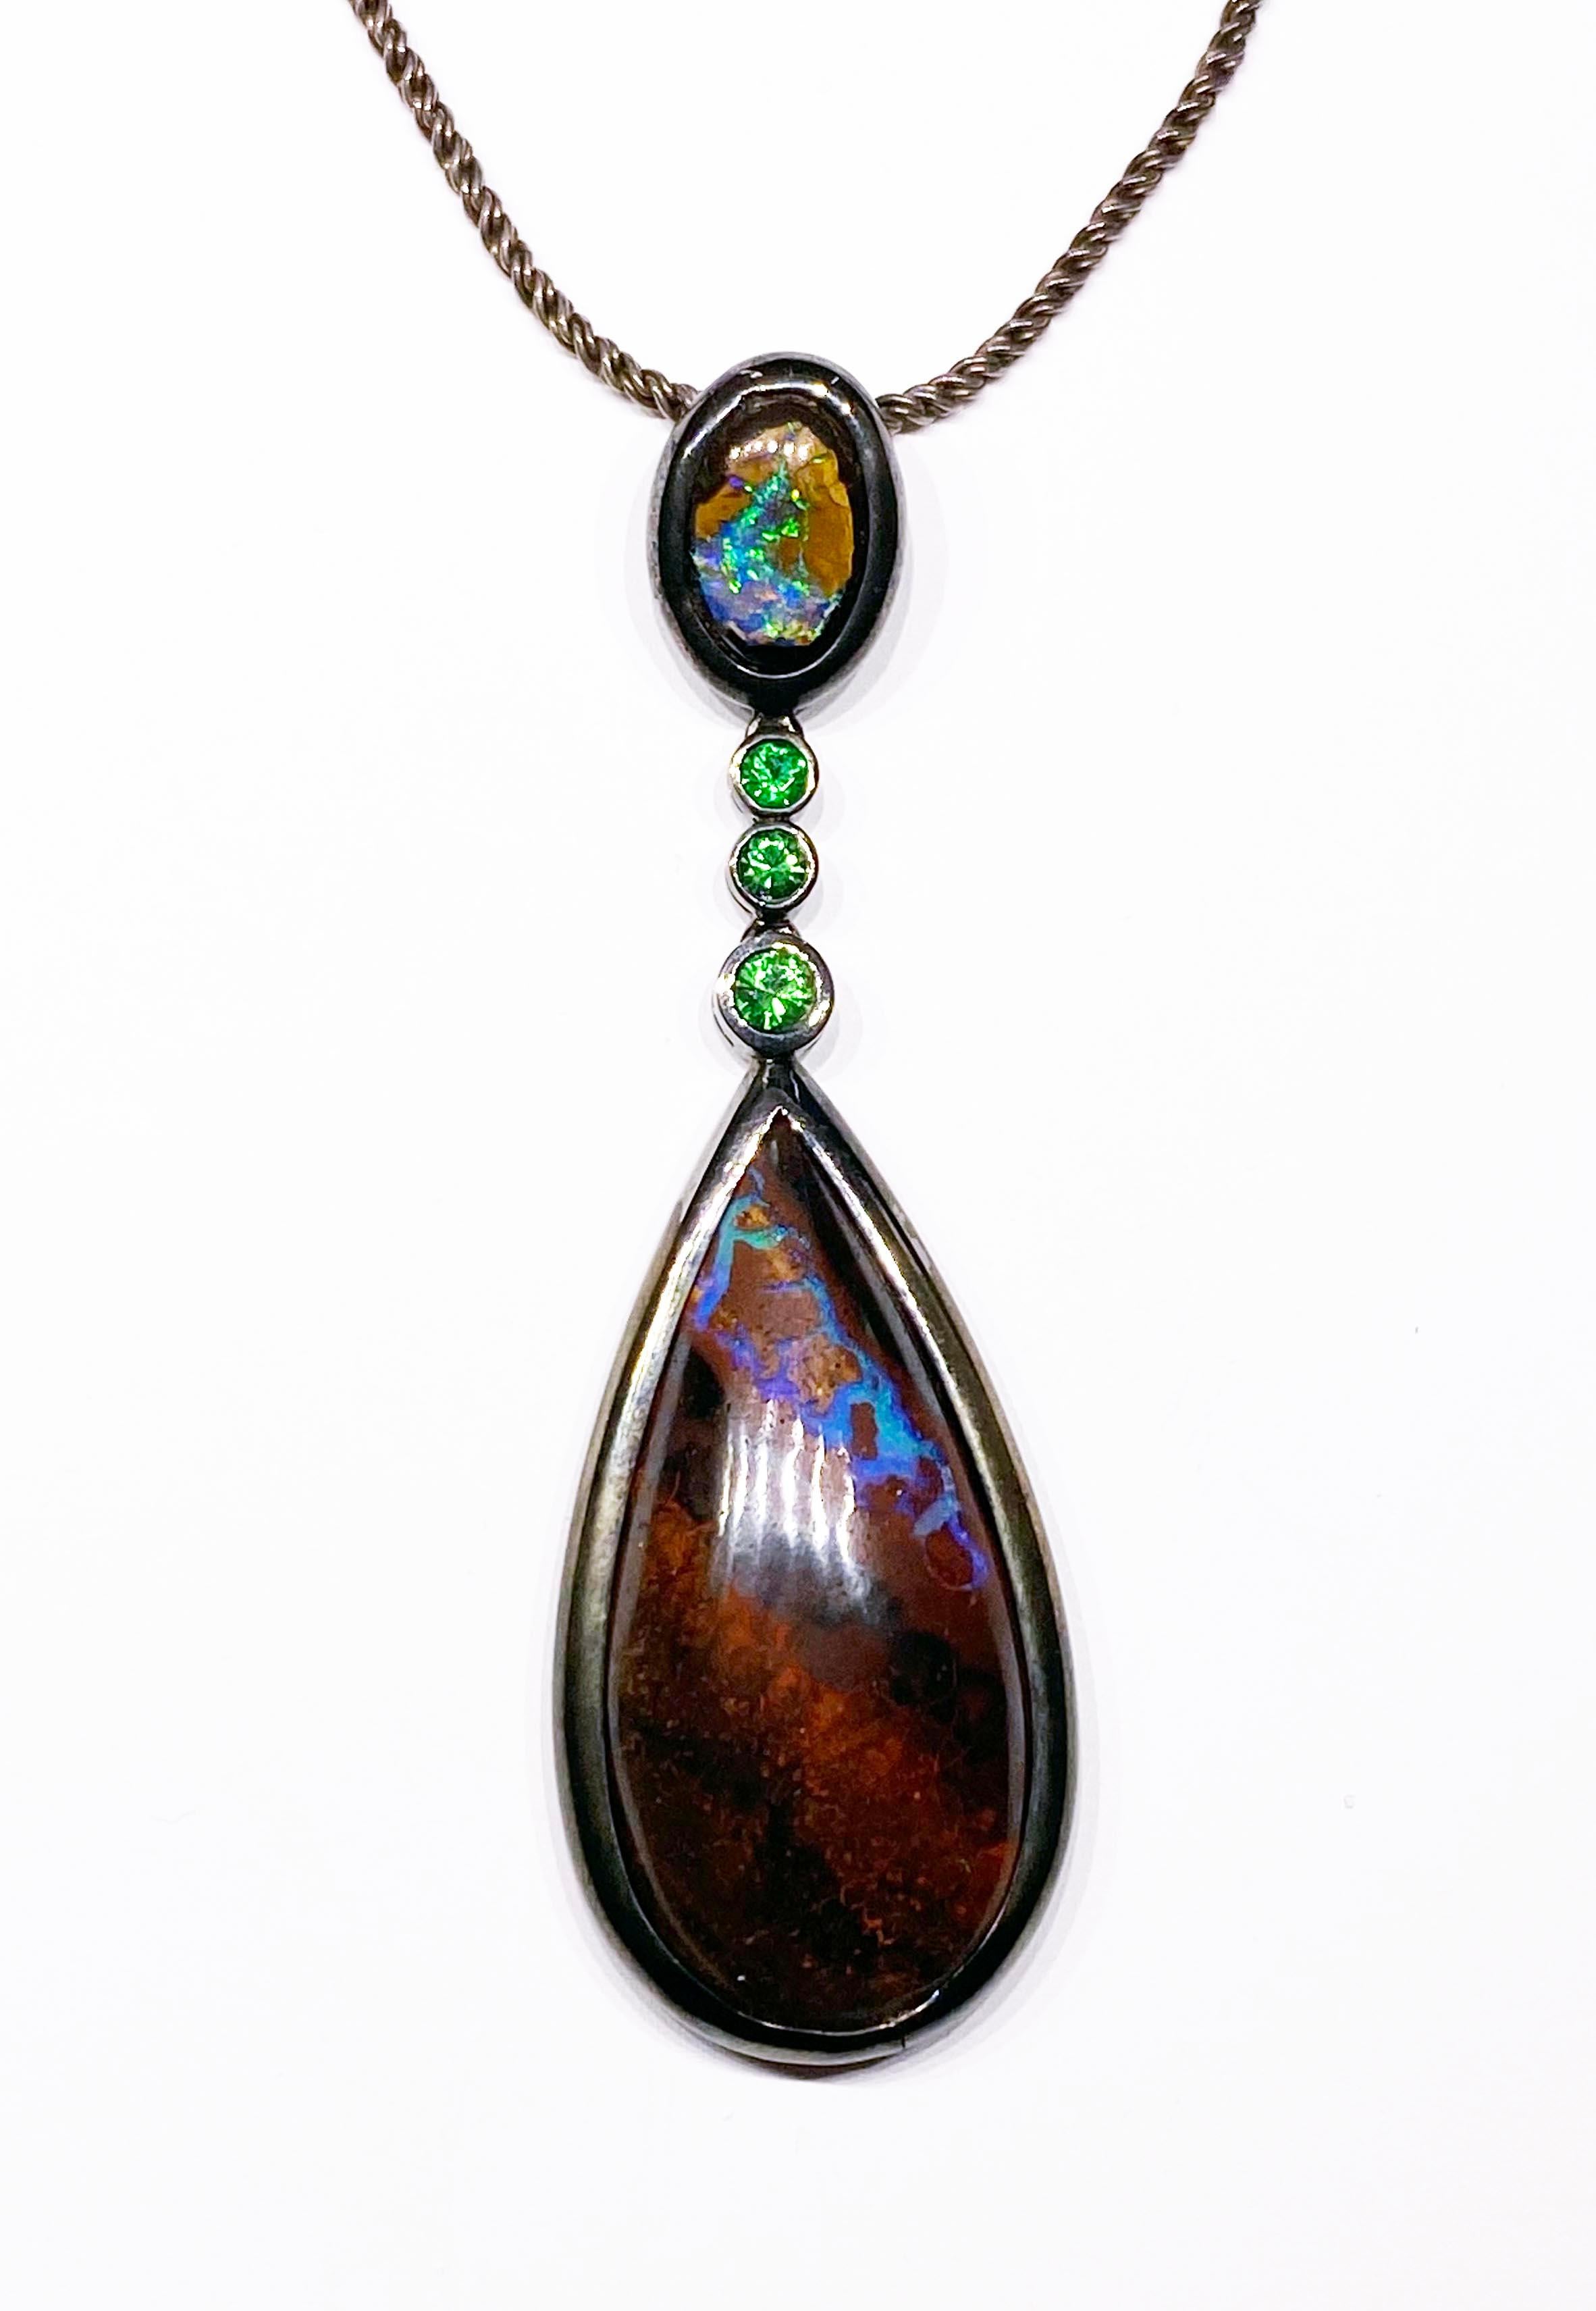 A  Boulder Opal & Tsavorite Garnet Pendant set in blackened Silver.
This Pendant features 2 Amazing Australian Boulder Opal Cabochons. The main Pear Shaped Cab is approxamately 40 Carats while the Smaller Oval is 5.22 Carats. Between are 3 Vivid